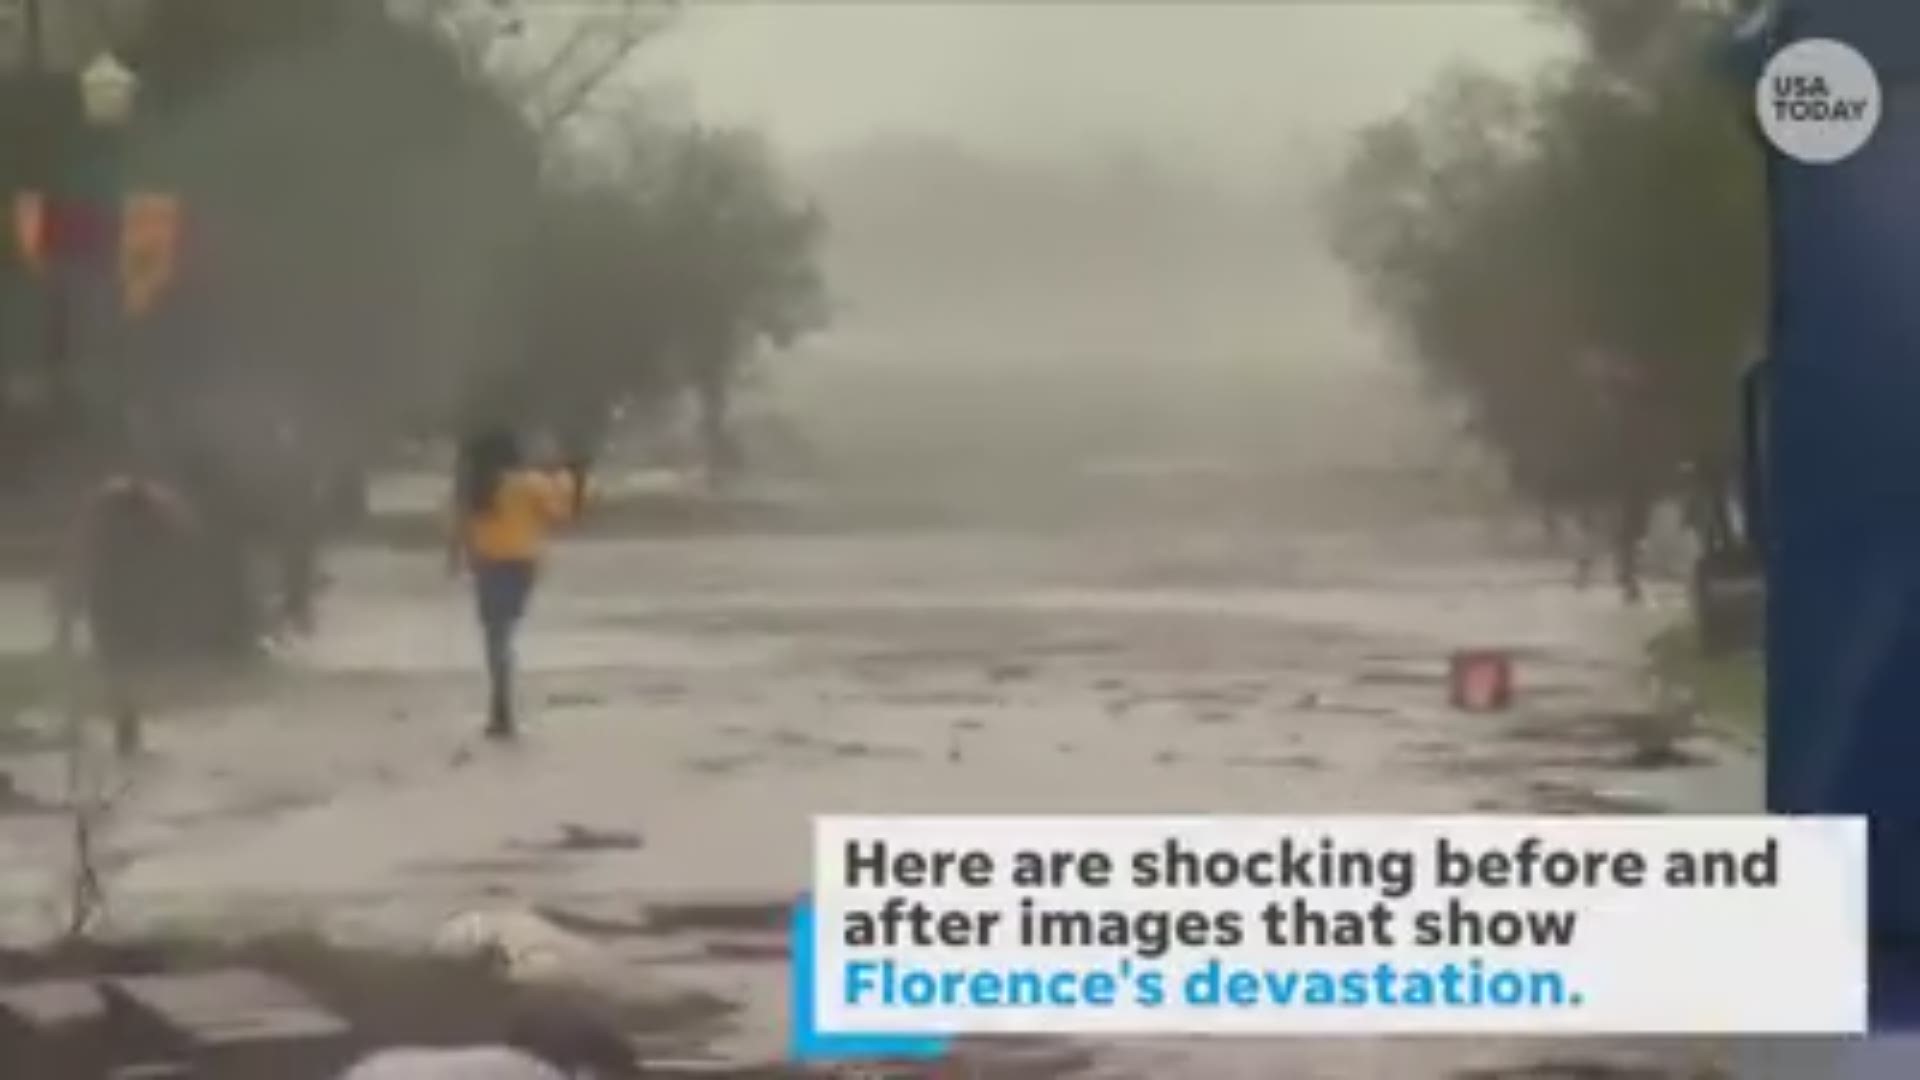 A stunning look at the destruction Florence left after making landfall in North Carolina.